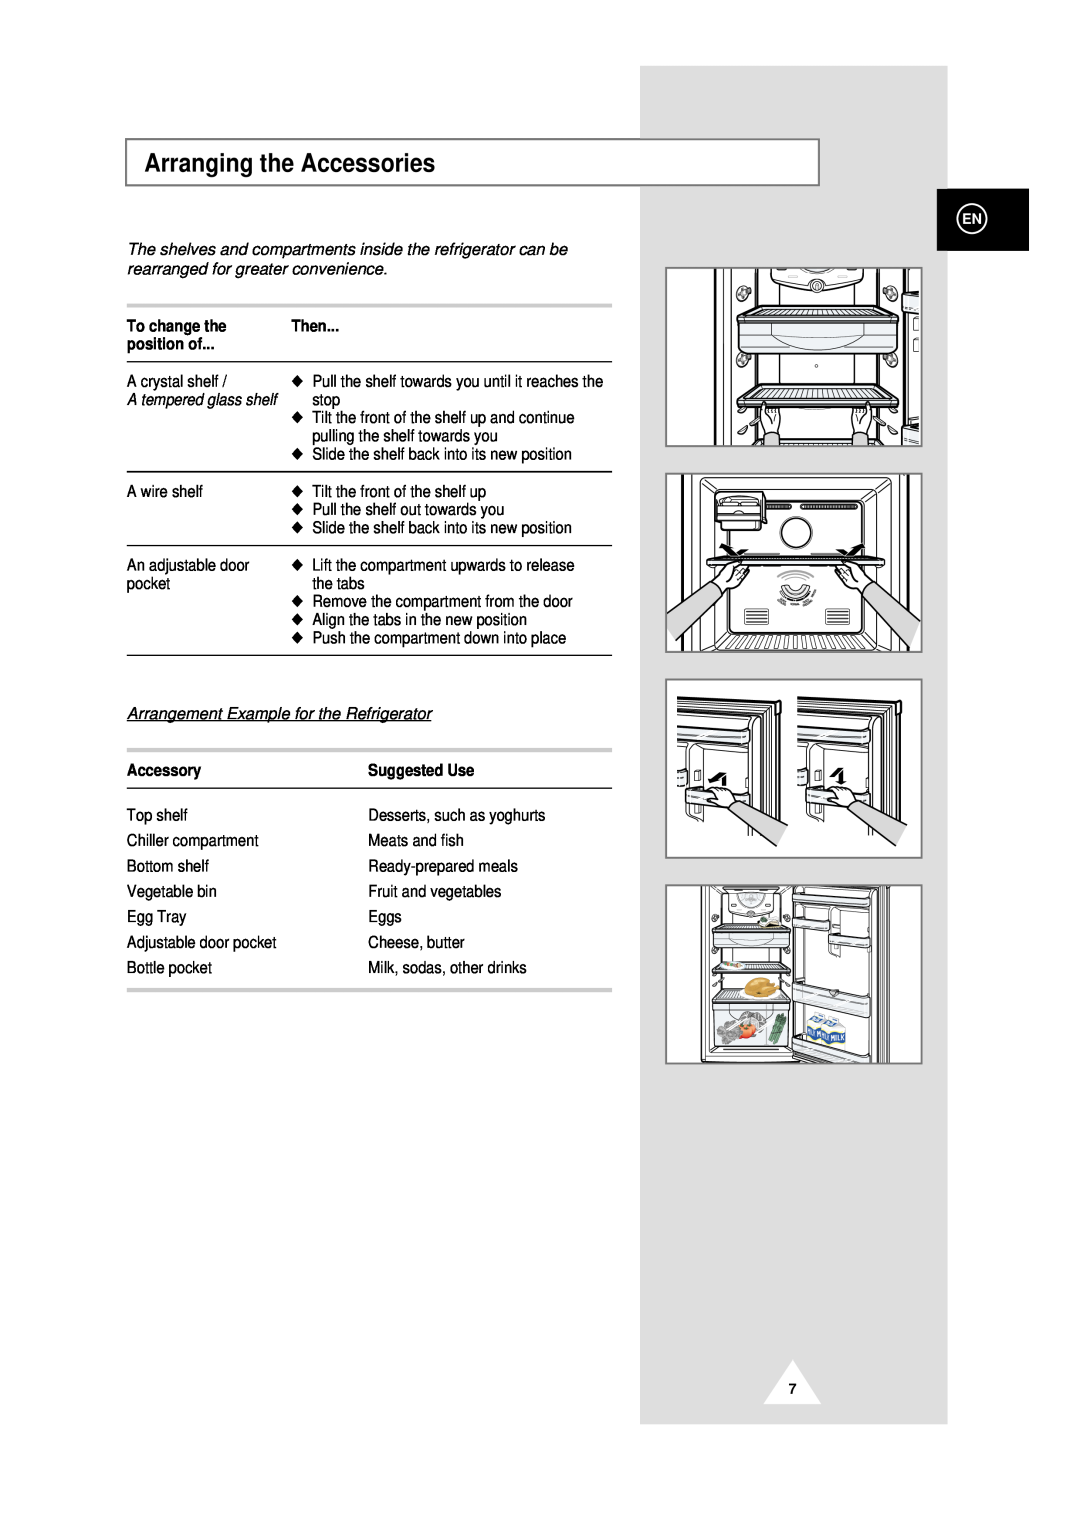 Samsung DA99-00478C Arranging the Accessories, To change the, Then, position of, Accessory, Suggested Use 